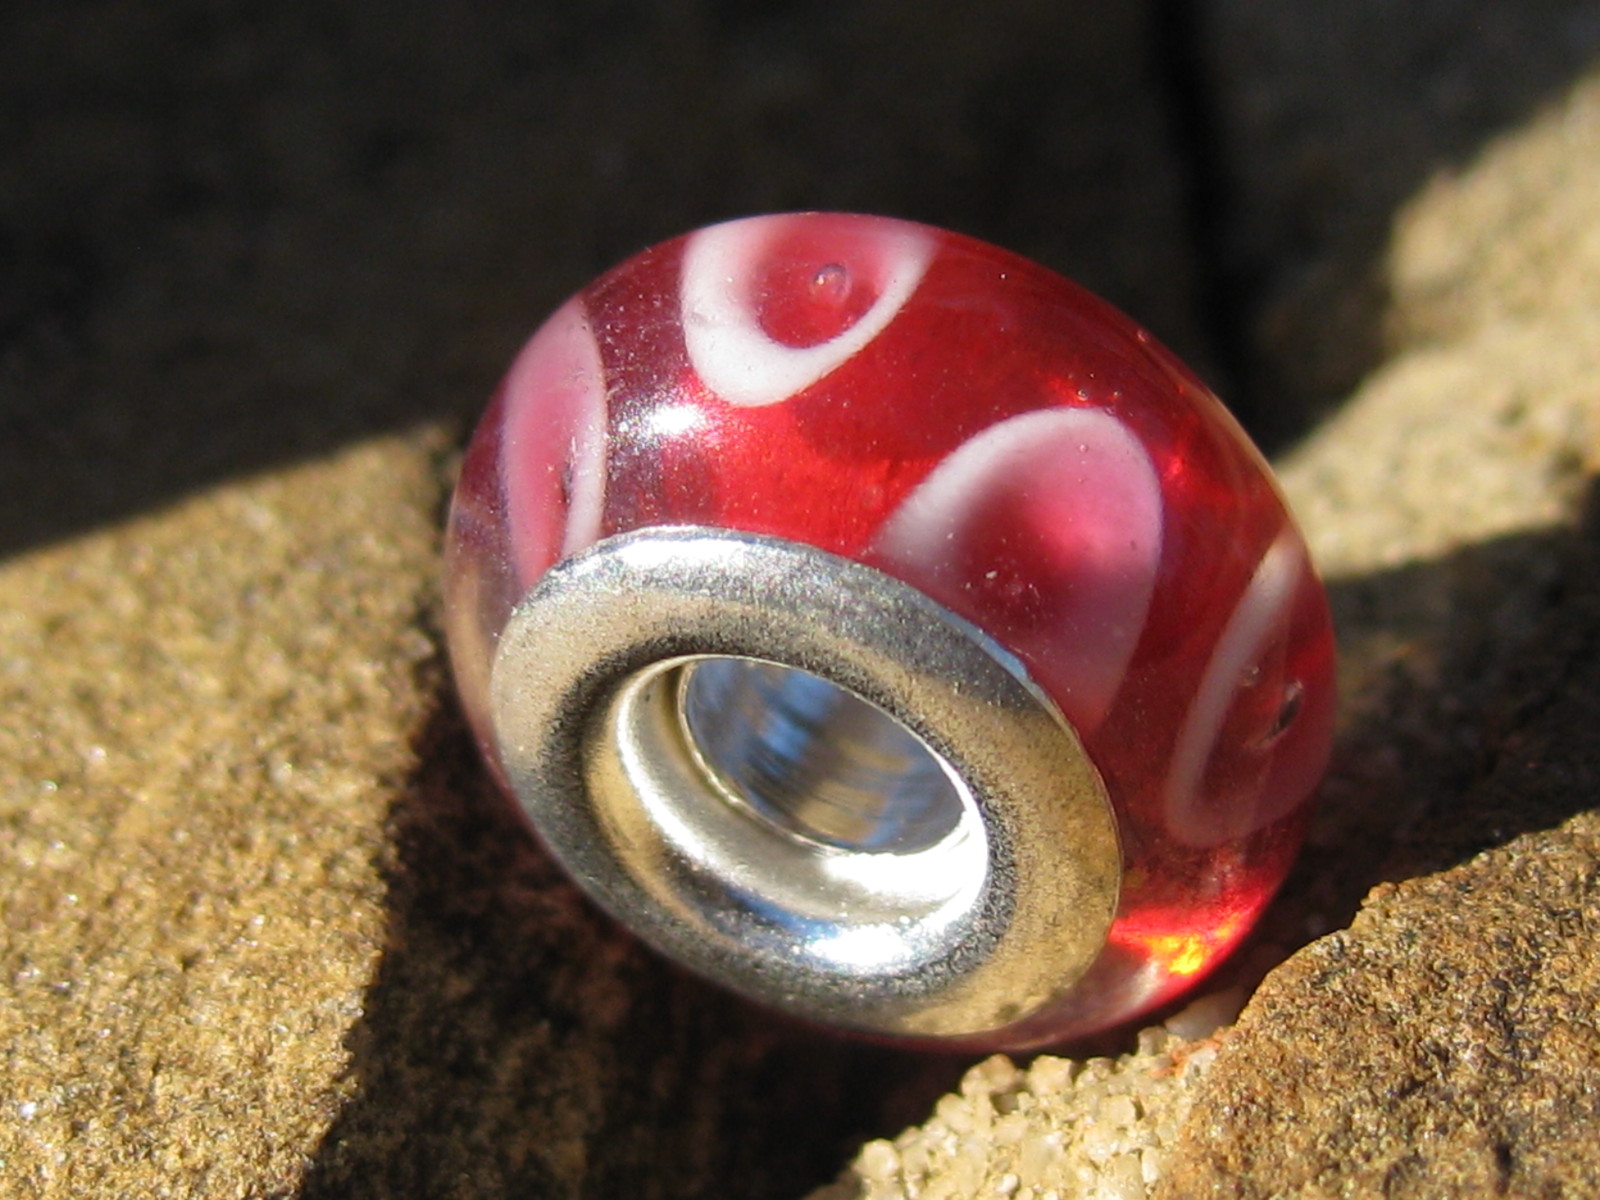 Triple Spell Cast Haunted SUPER SEXINESS Glass bead to make your own spell cast  - $15.00